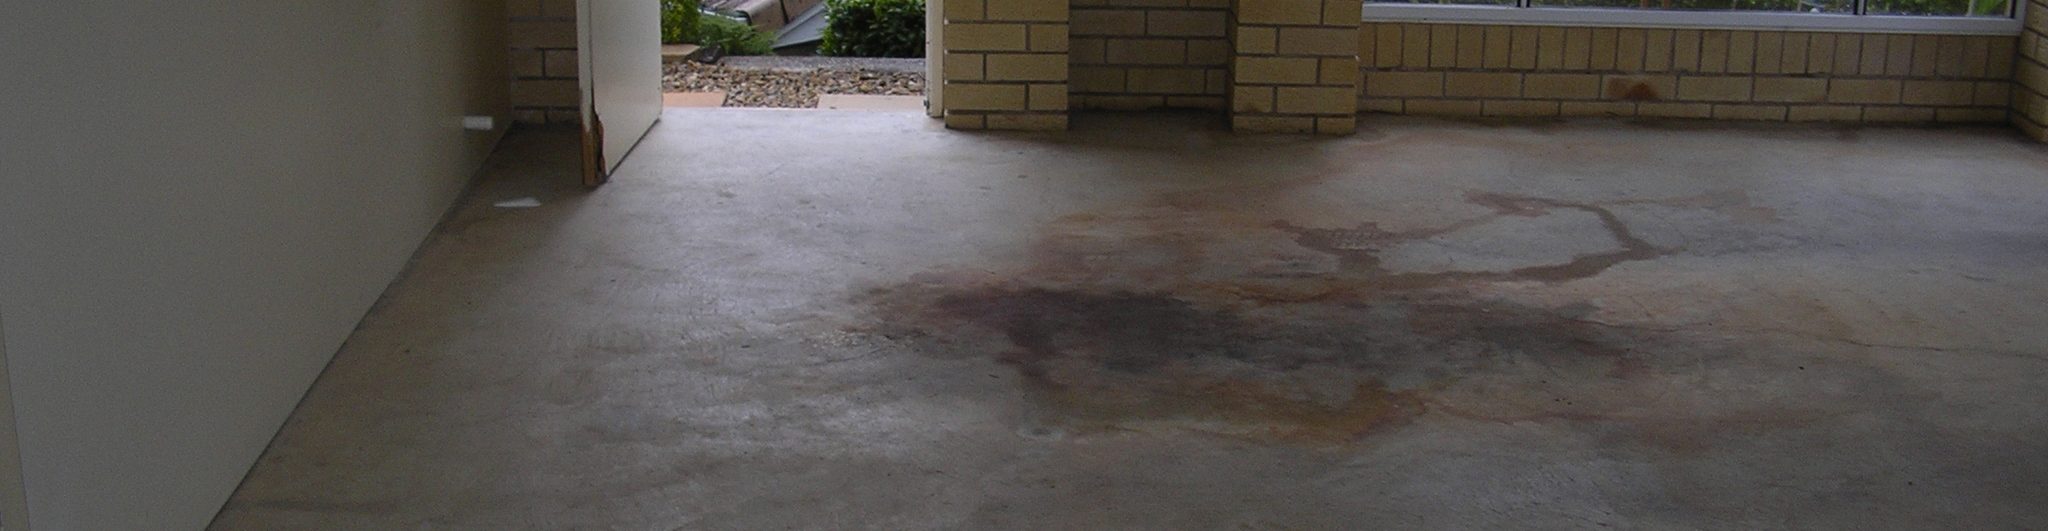 A garage floor with oil stains awaiting substrate assessment.